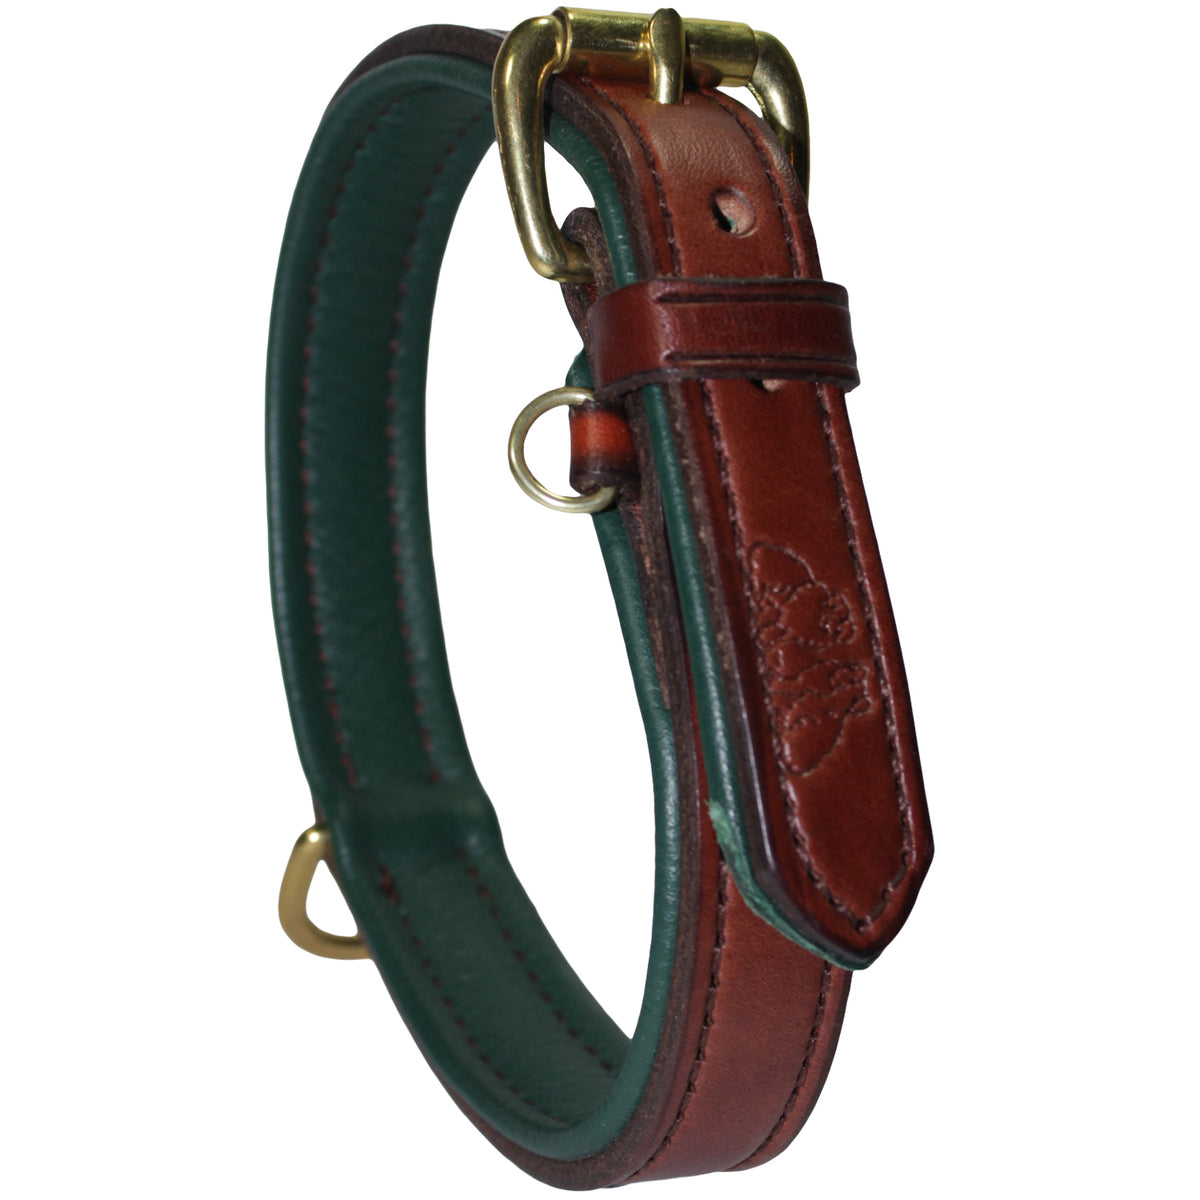 Amish Made Luxury Leather Dog Collar - Havana Brown with Hunter Green or Royal Blue Pebble Leather Lining